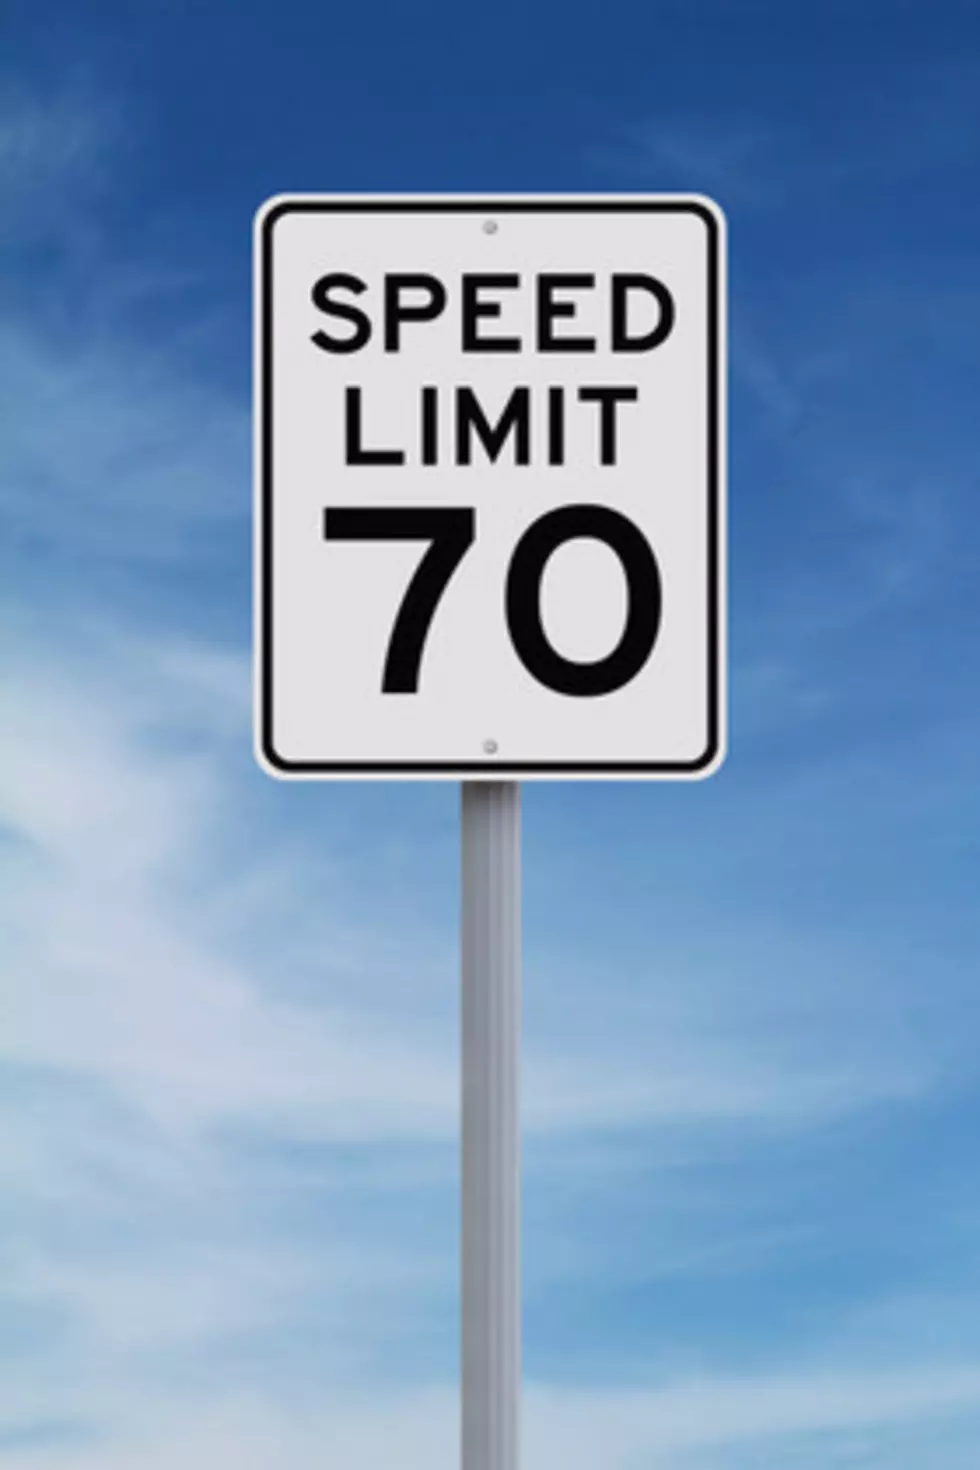 Idaho to Put Variable Speed Limit Signs on Stretch of I-15